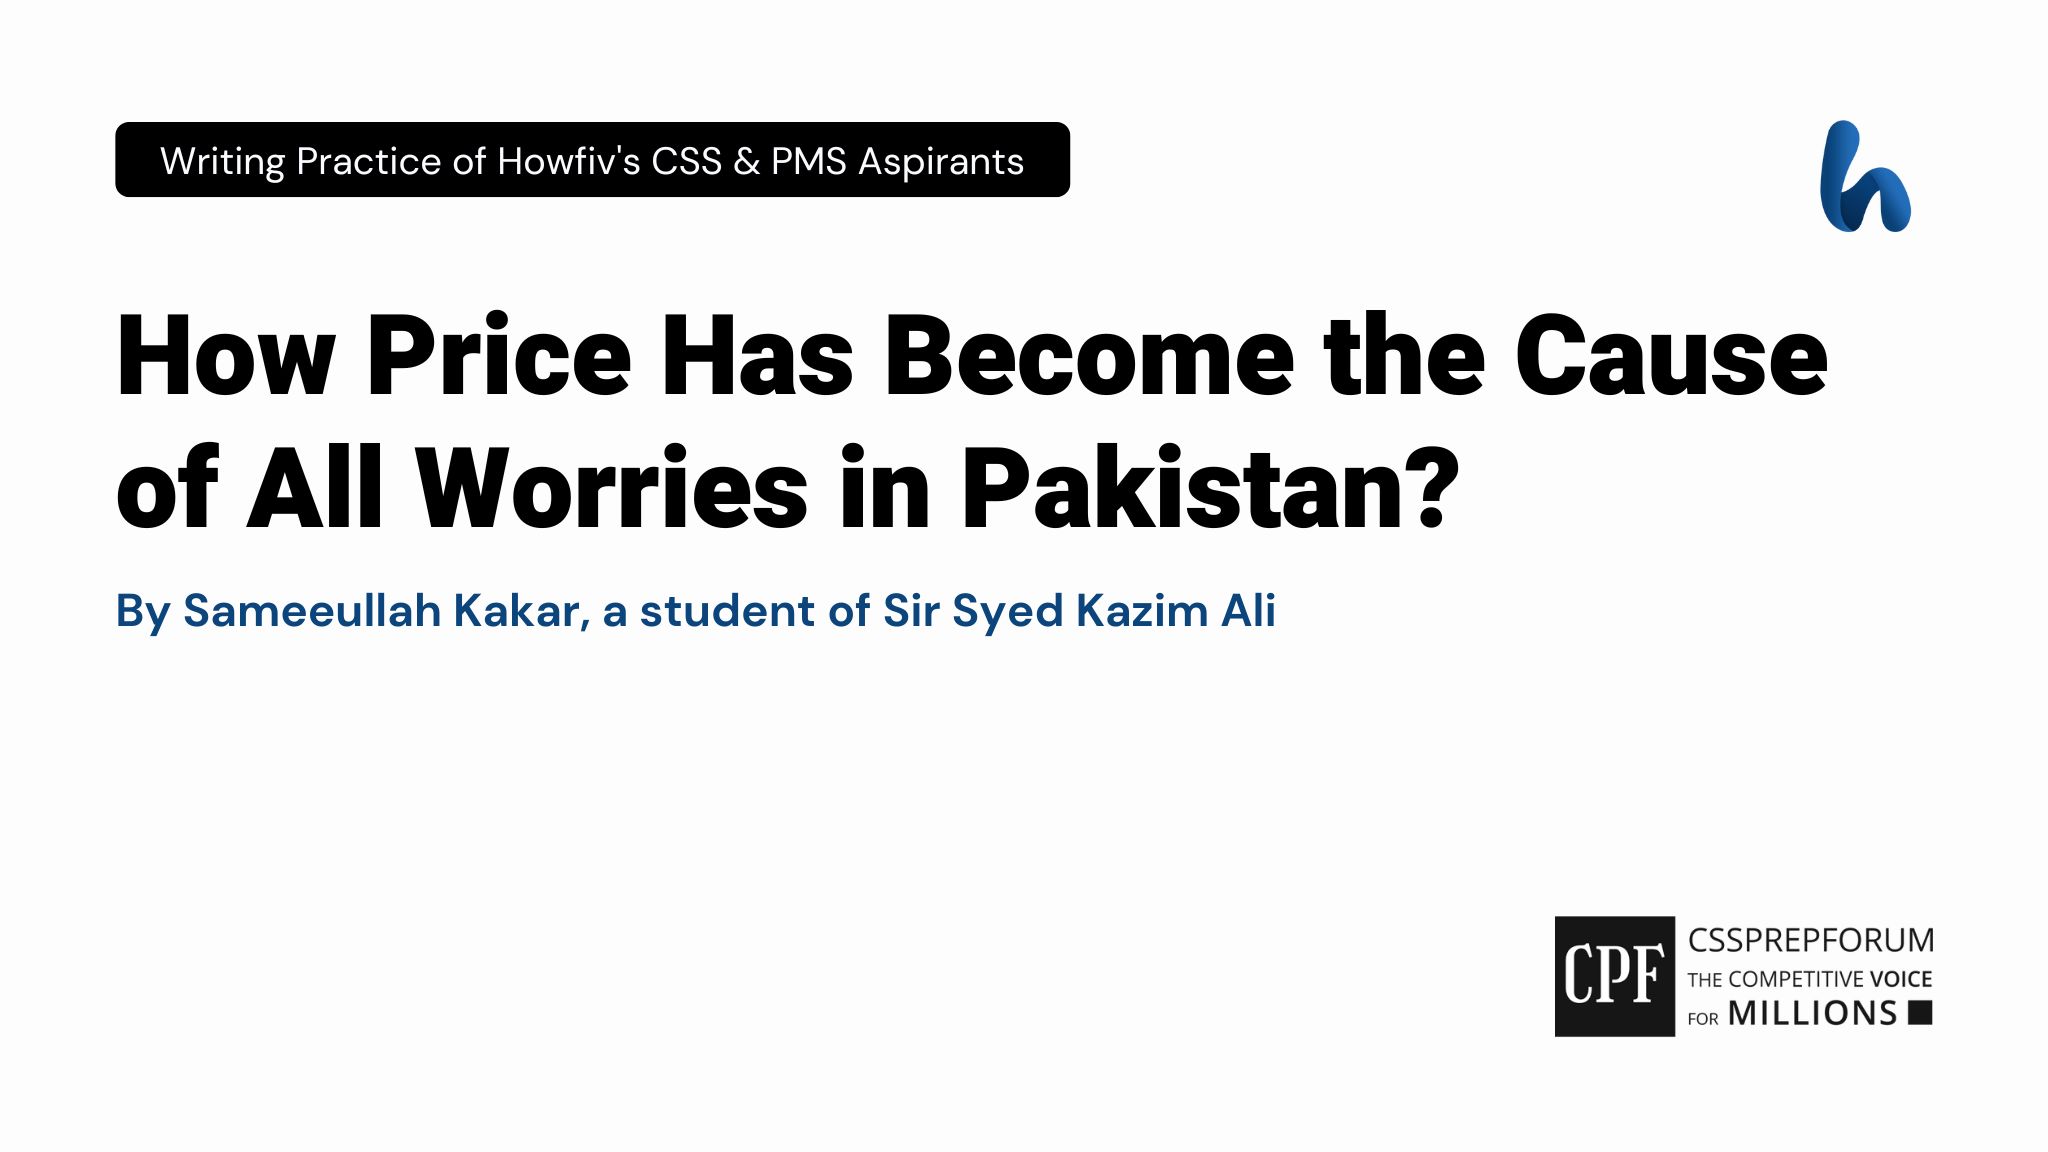 How Price Has Become the Cause of All Worries in Pakistan - sameeullah